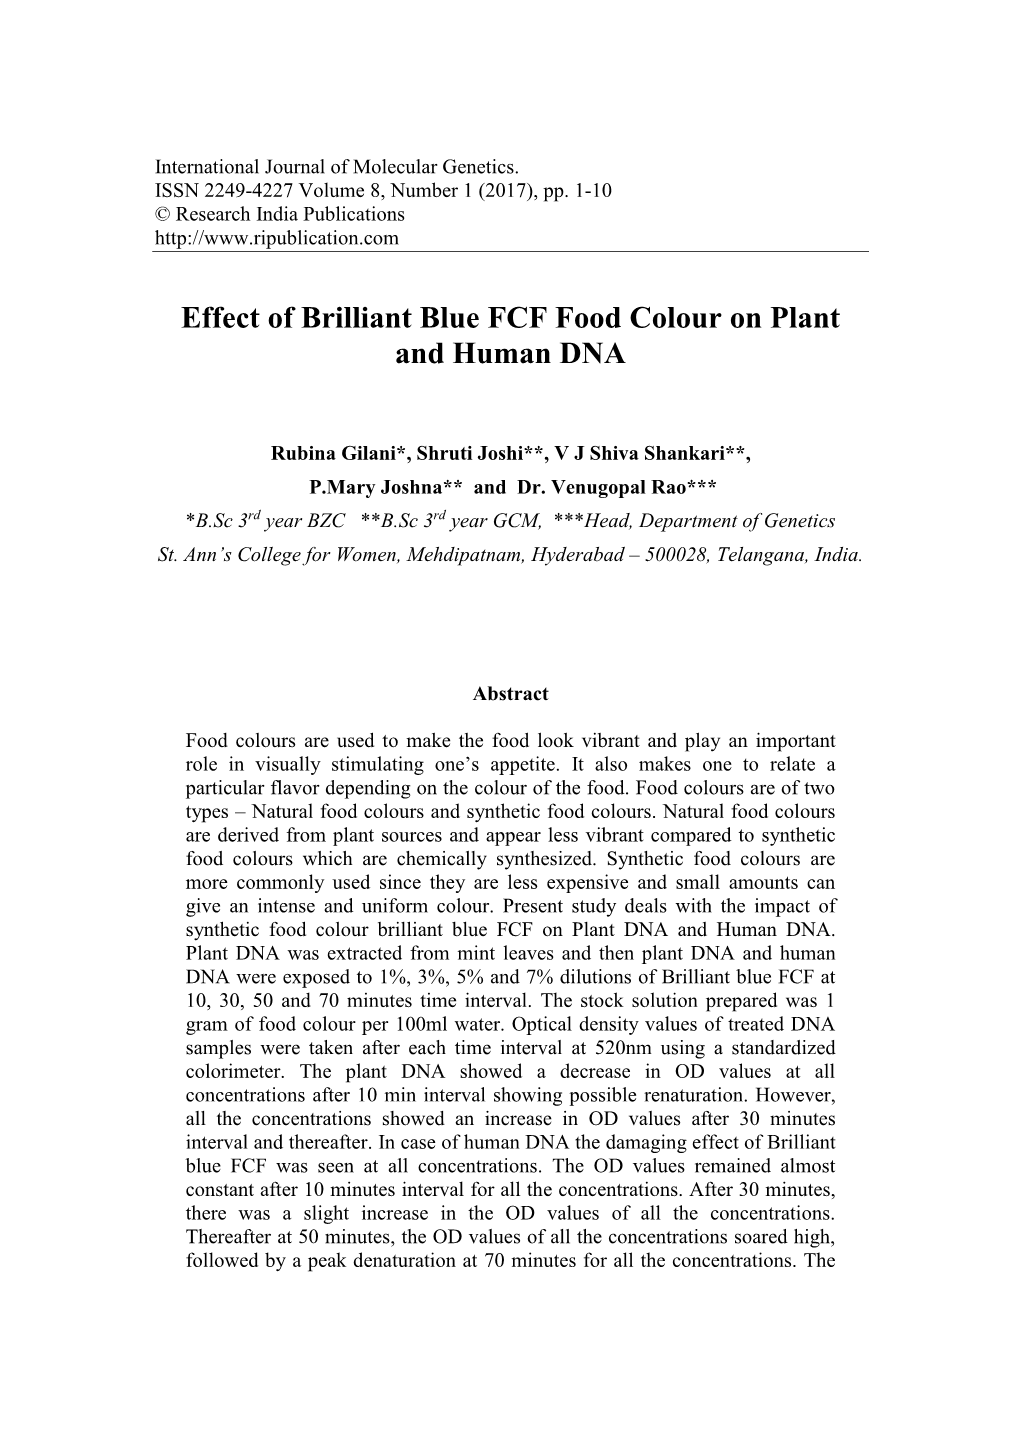 Effect of Brilliant Blue FCF Food Colour on Plant and Human DNA